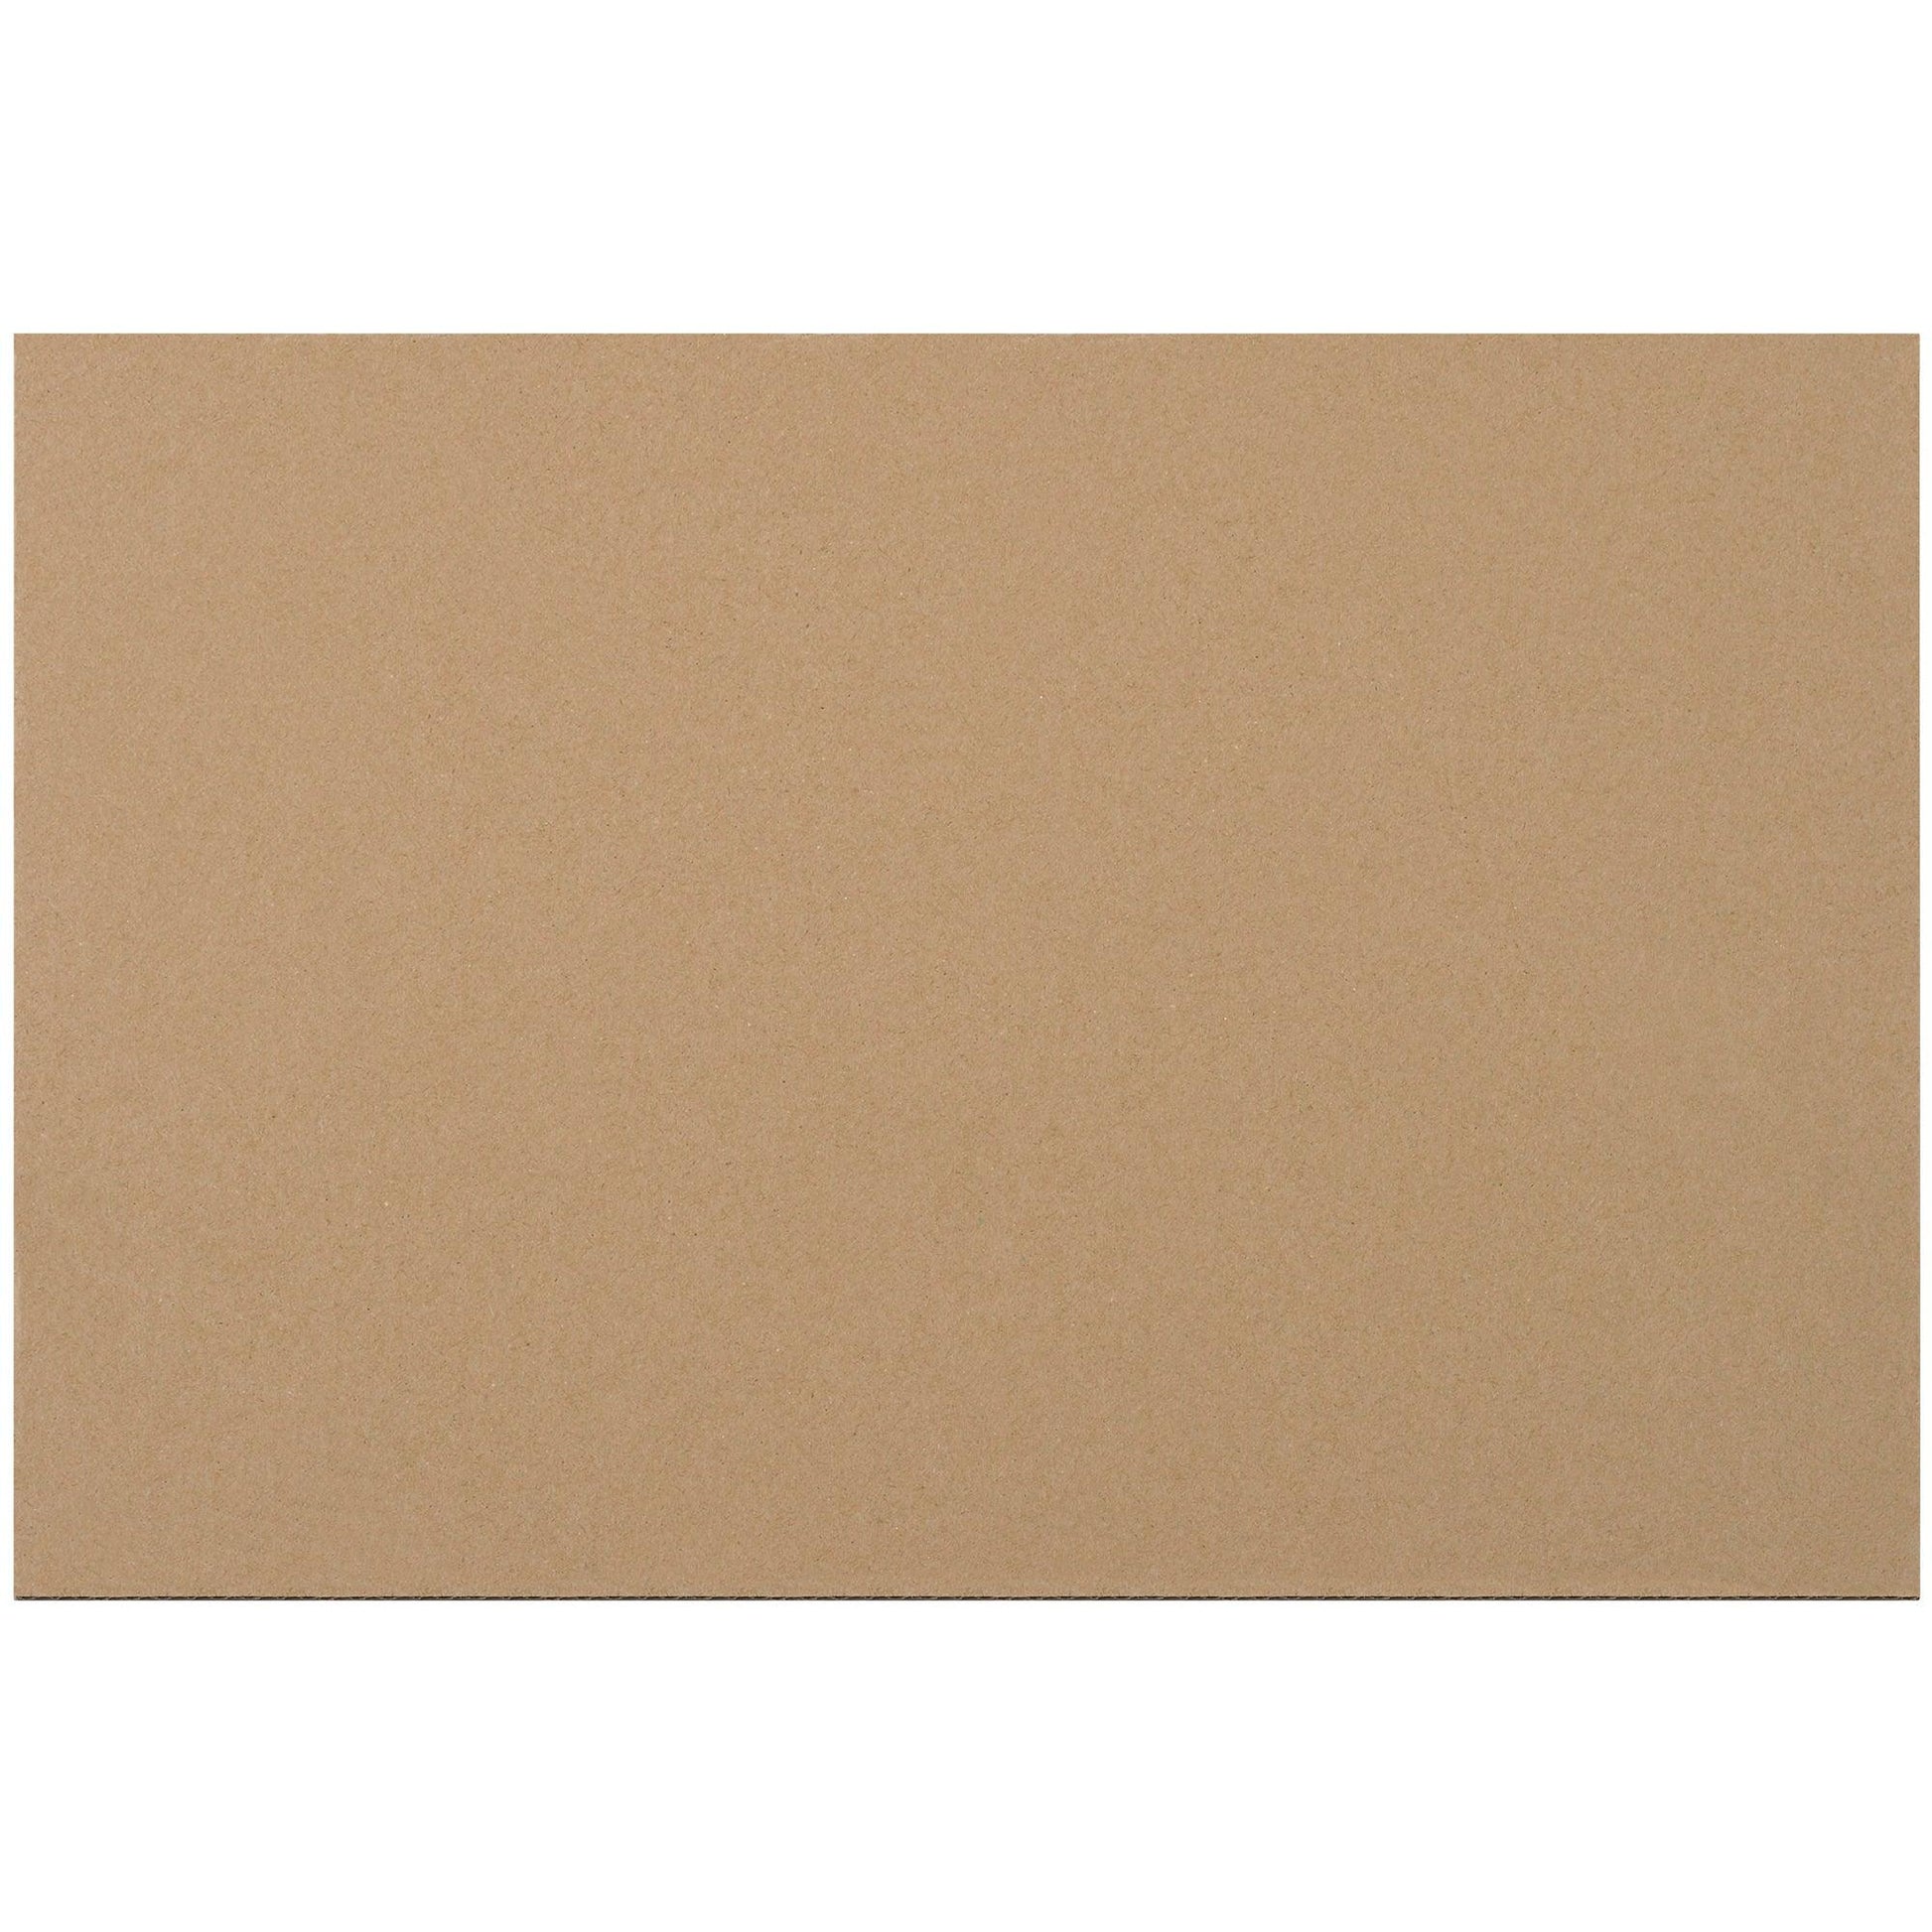 11 7/8 x 17 7/8" Corrugated Layer Pads - SP1117